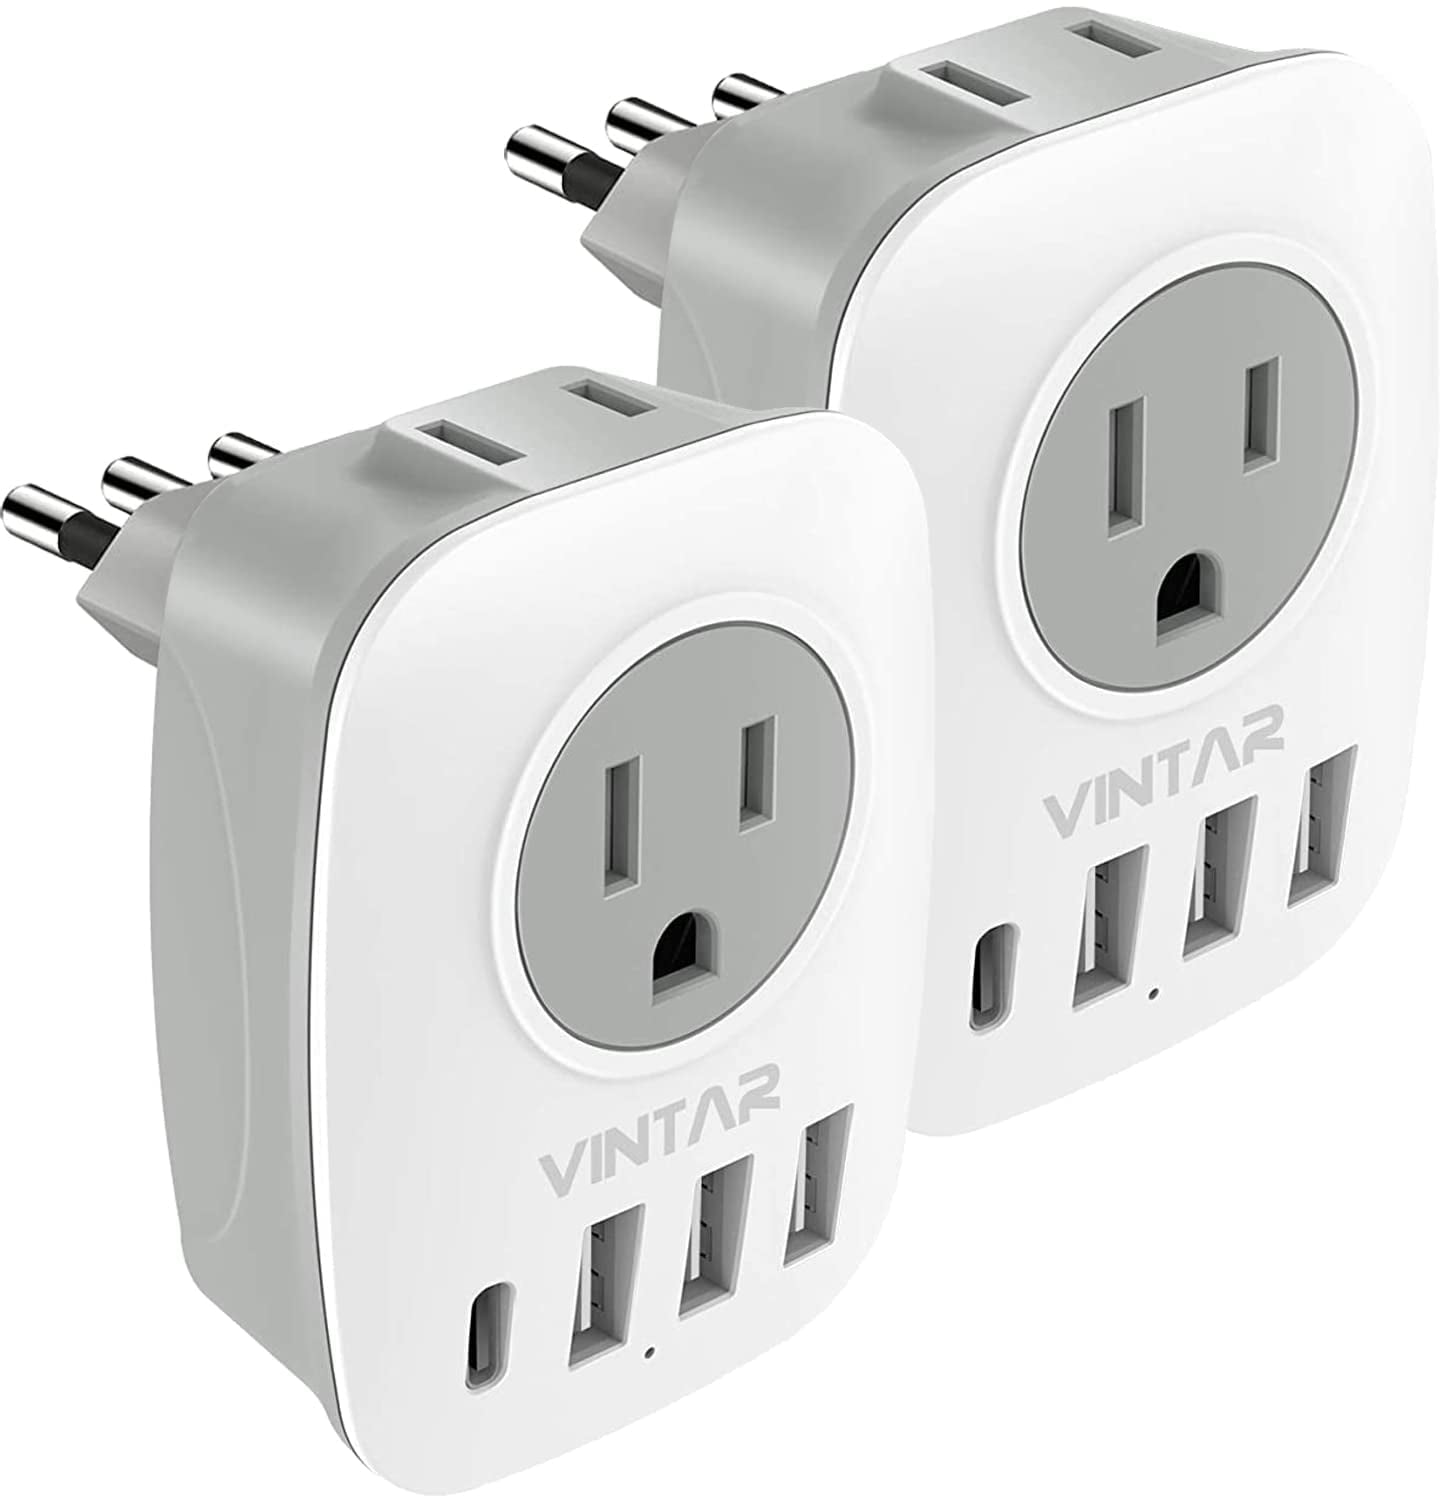 OREI American USA To European Schuko Germany Plug Adapters CE Certified  Heavy Duty - 2 Pack (GS20)